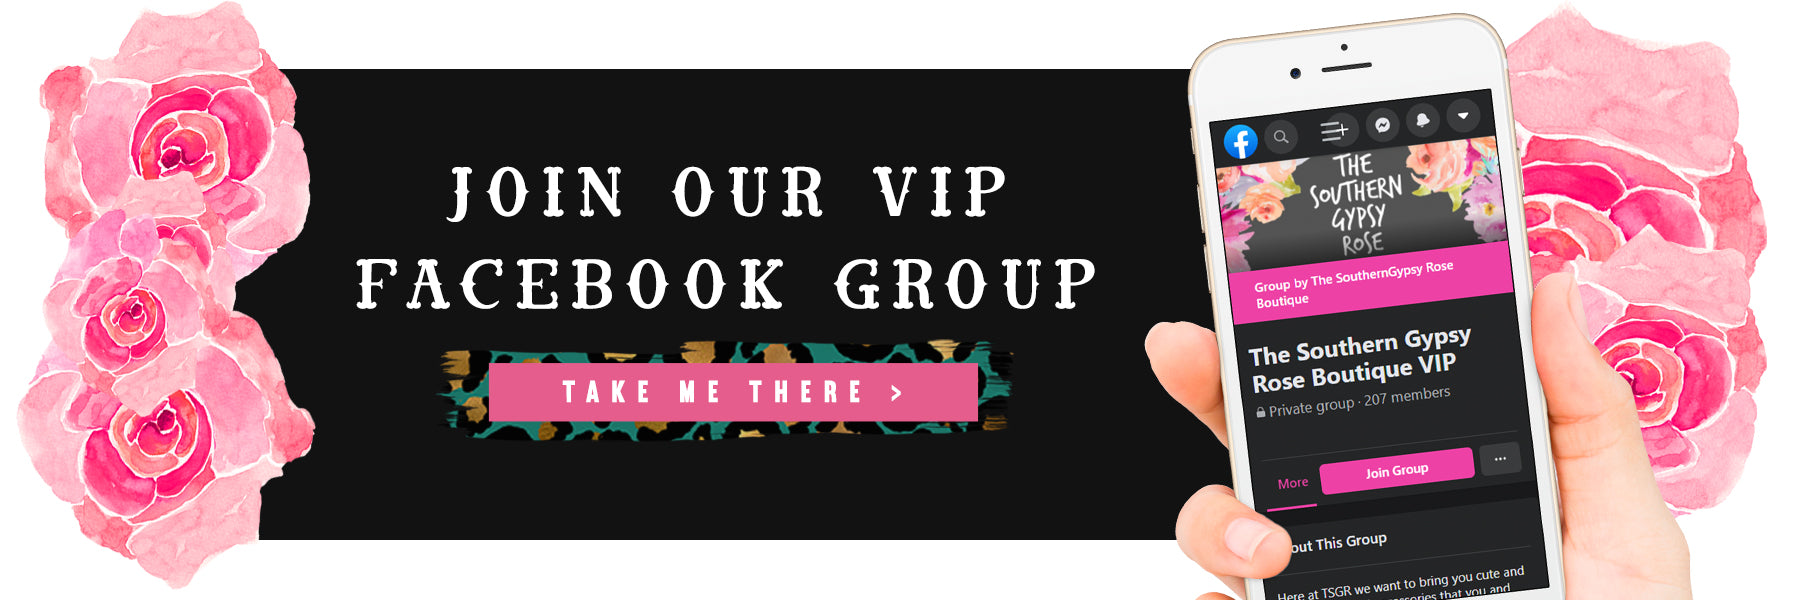 Join our VIP Facebook group!